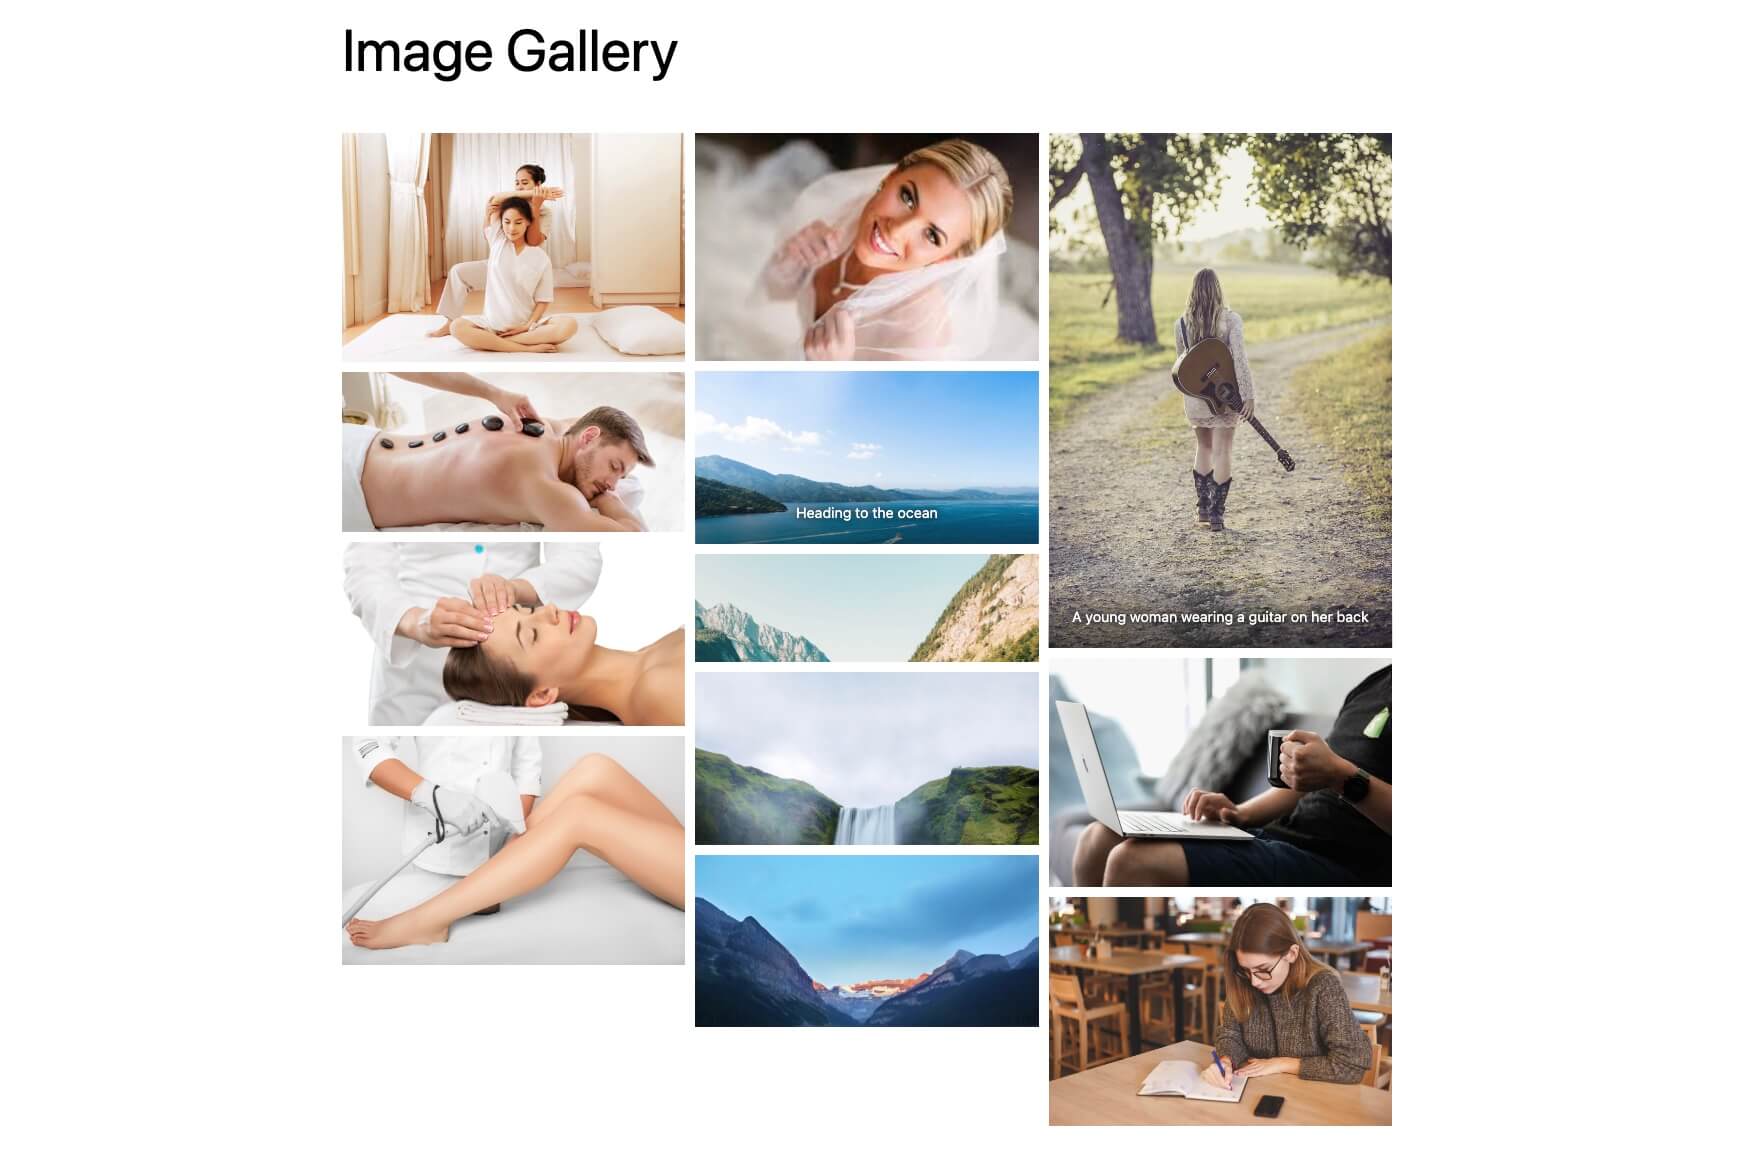 Display image gallery from selected folder